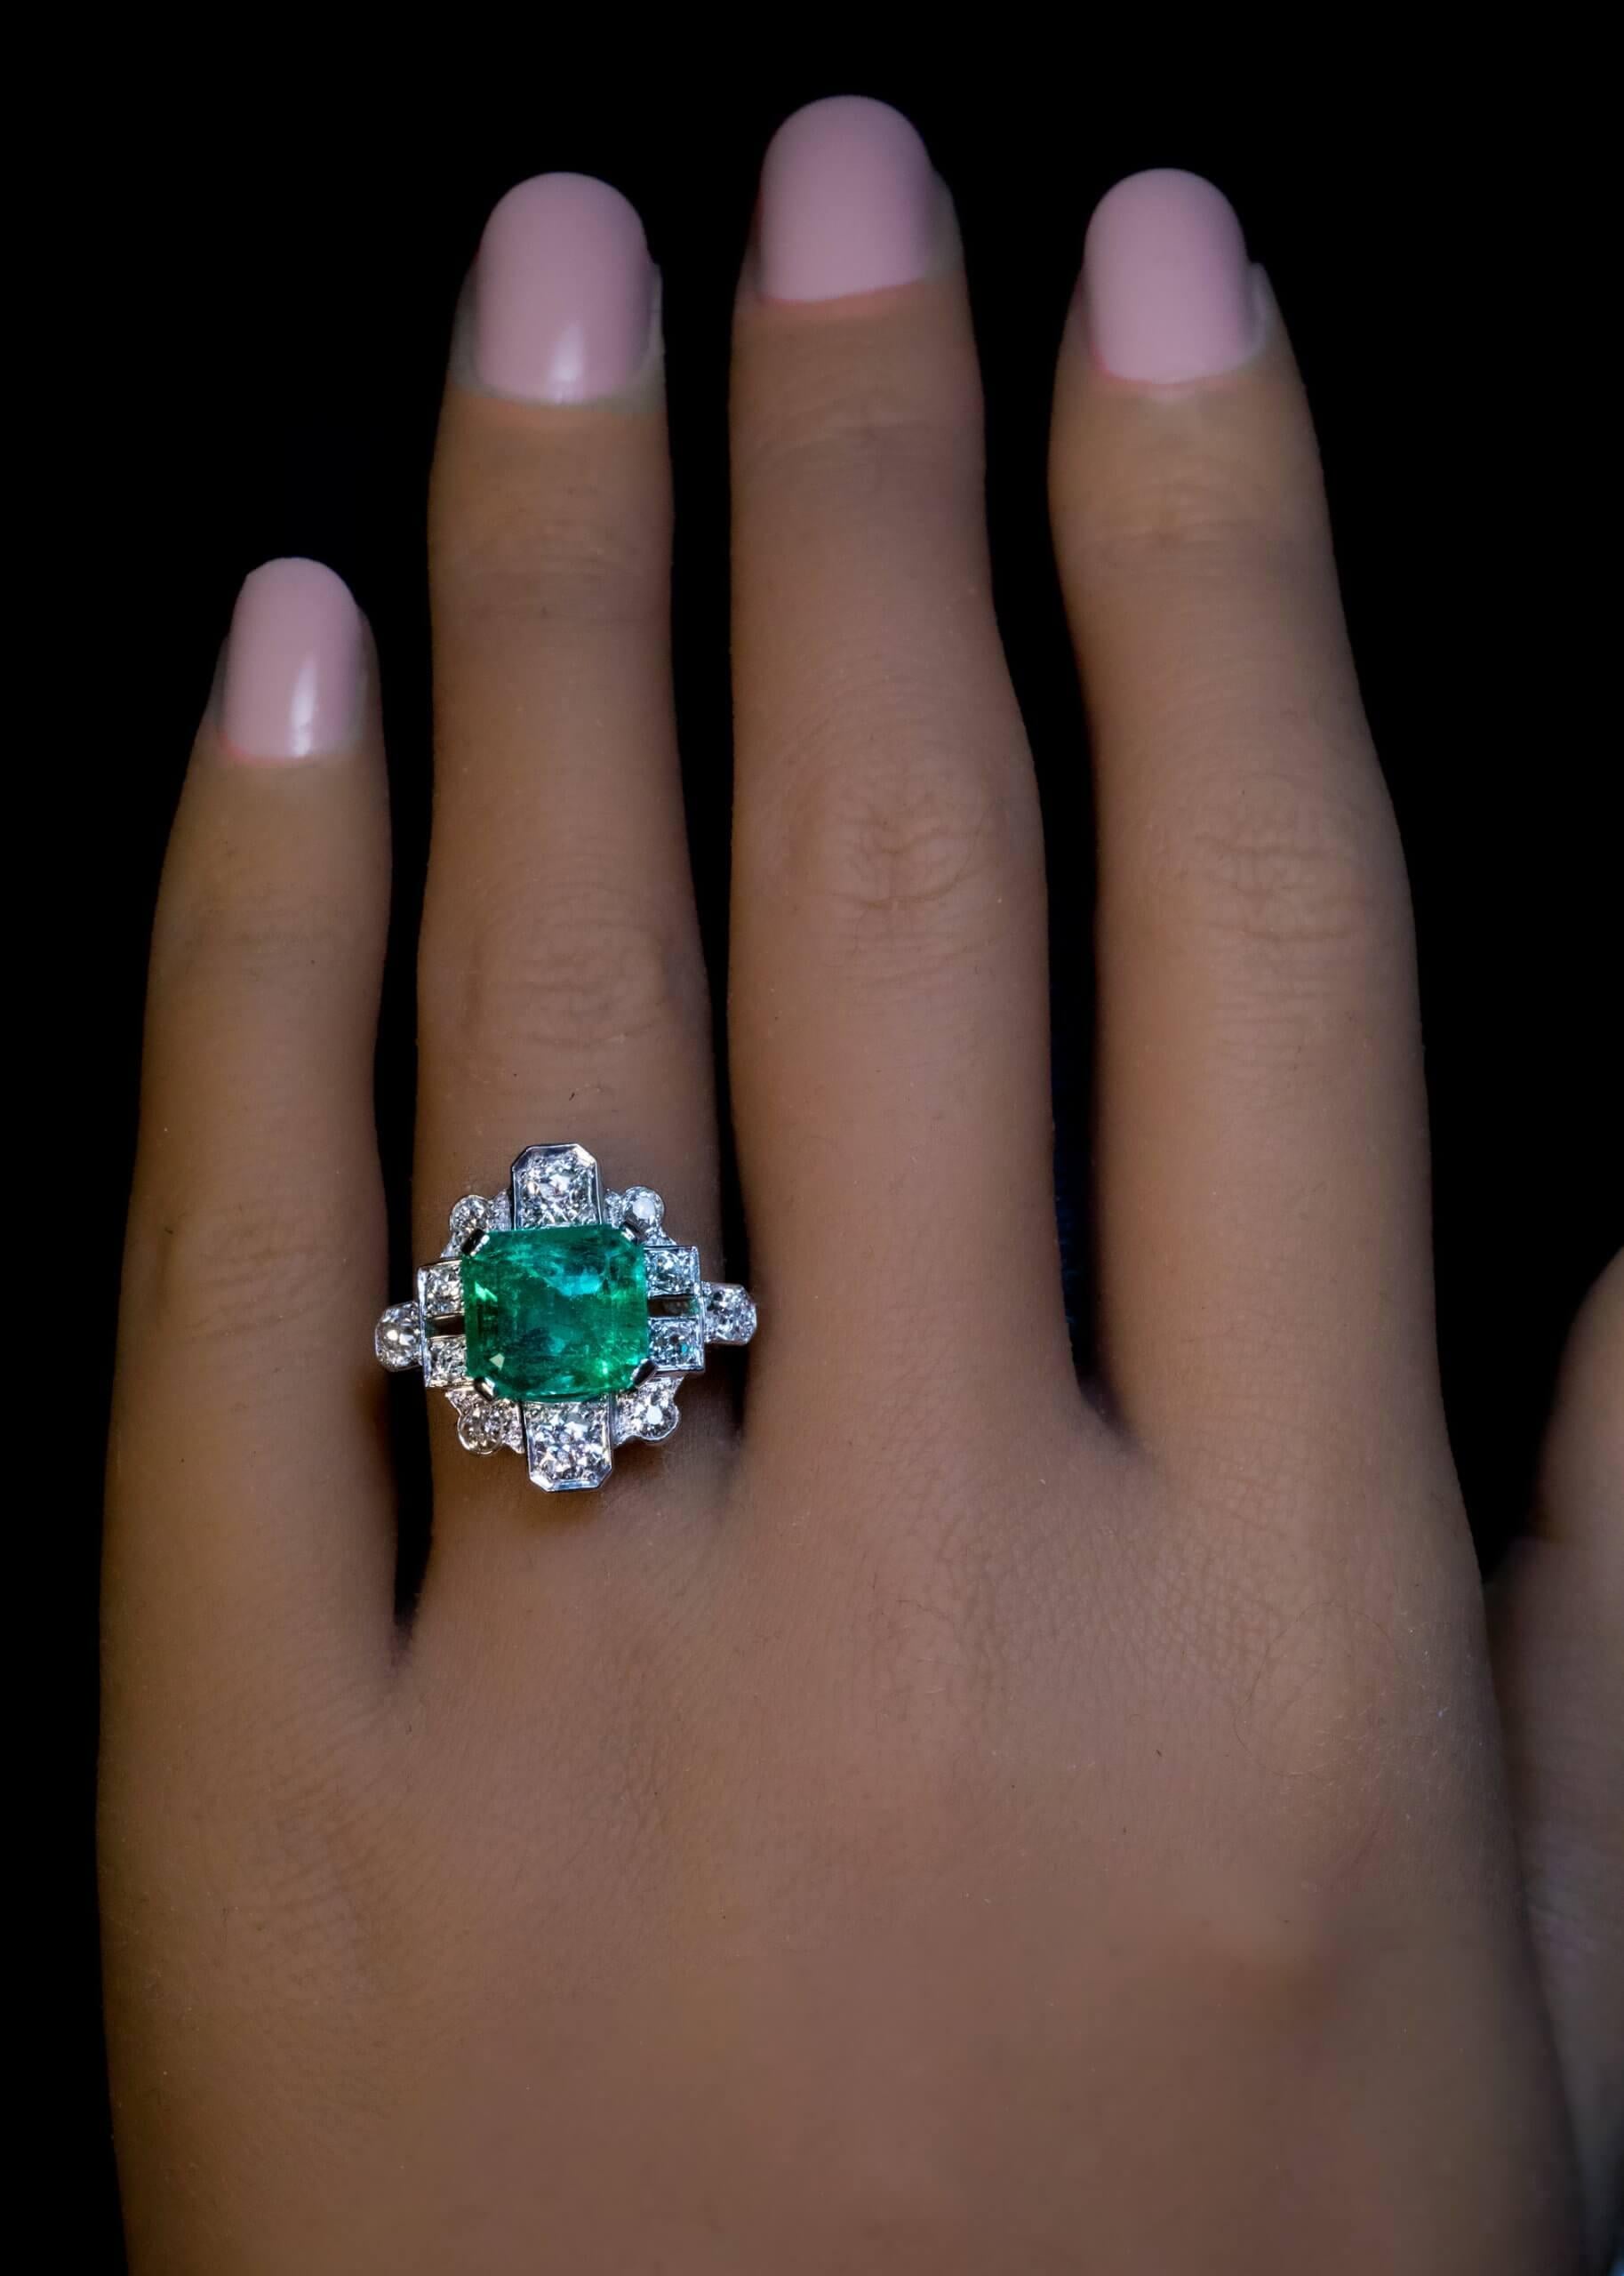 Circa 1930s
The ring is crafted in platinum and white 18K gold. It features a vibrant 3.76 ct Colombian emerald of a bright bluish green color. The emerald is framed by bright white old mine cut diamonds (F-G color, SI1-SI2 clarity).
The emerald